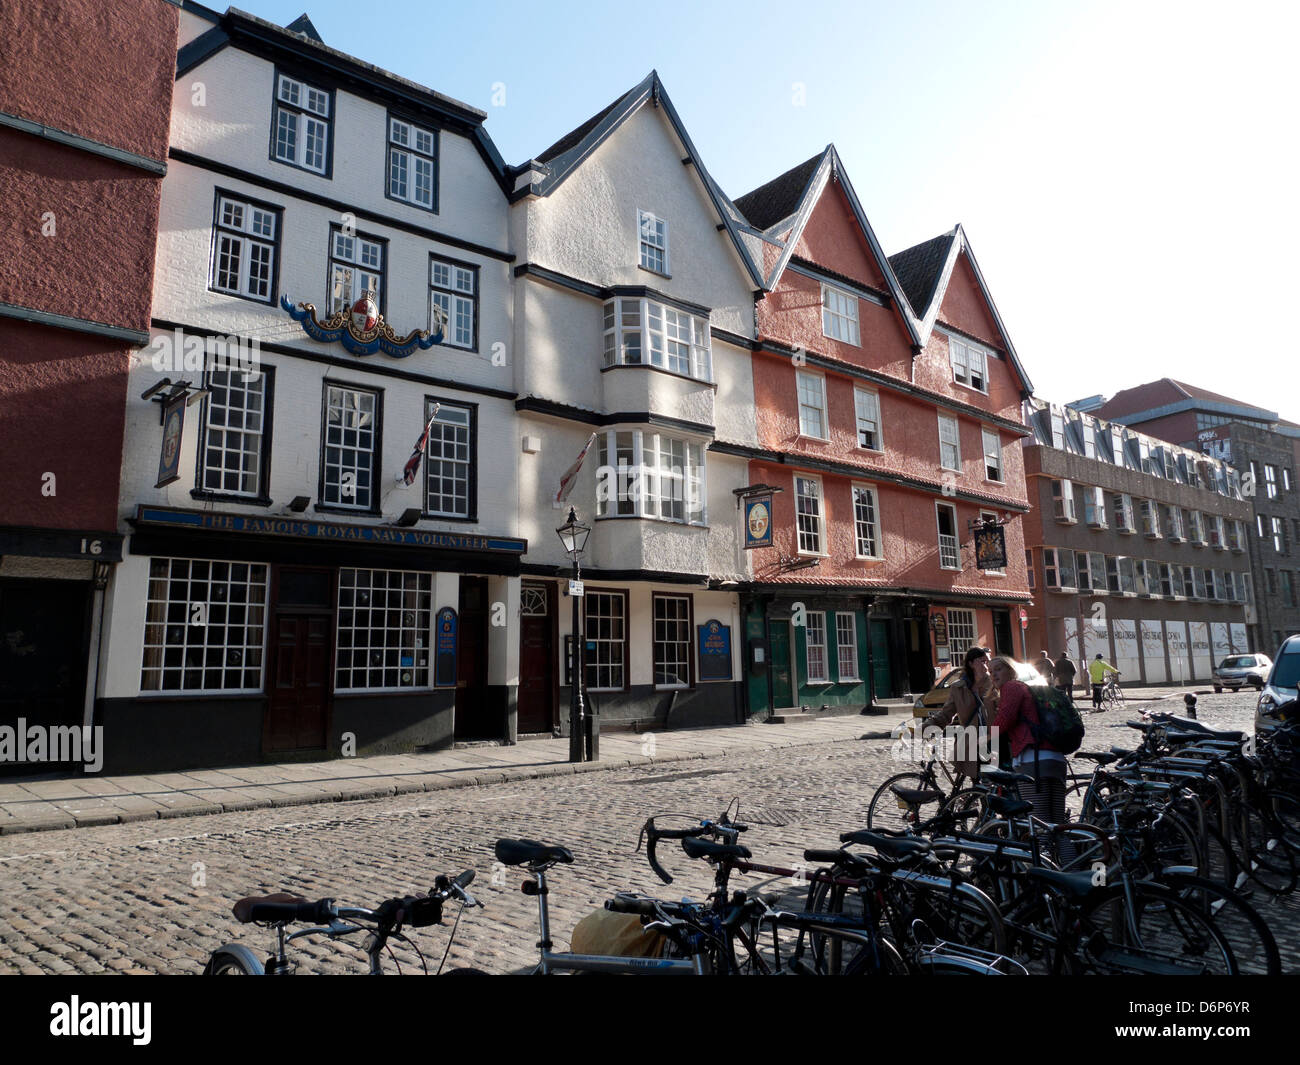 A view of buildings and bicycles on cobblestone King Street in Bristol England UK  KATHY DEWITT Stock Photo